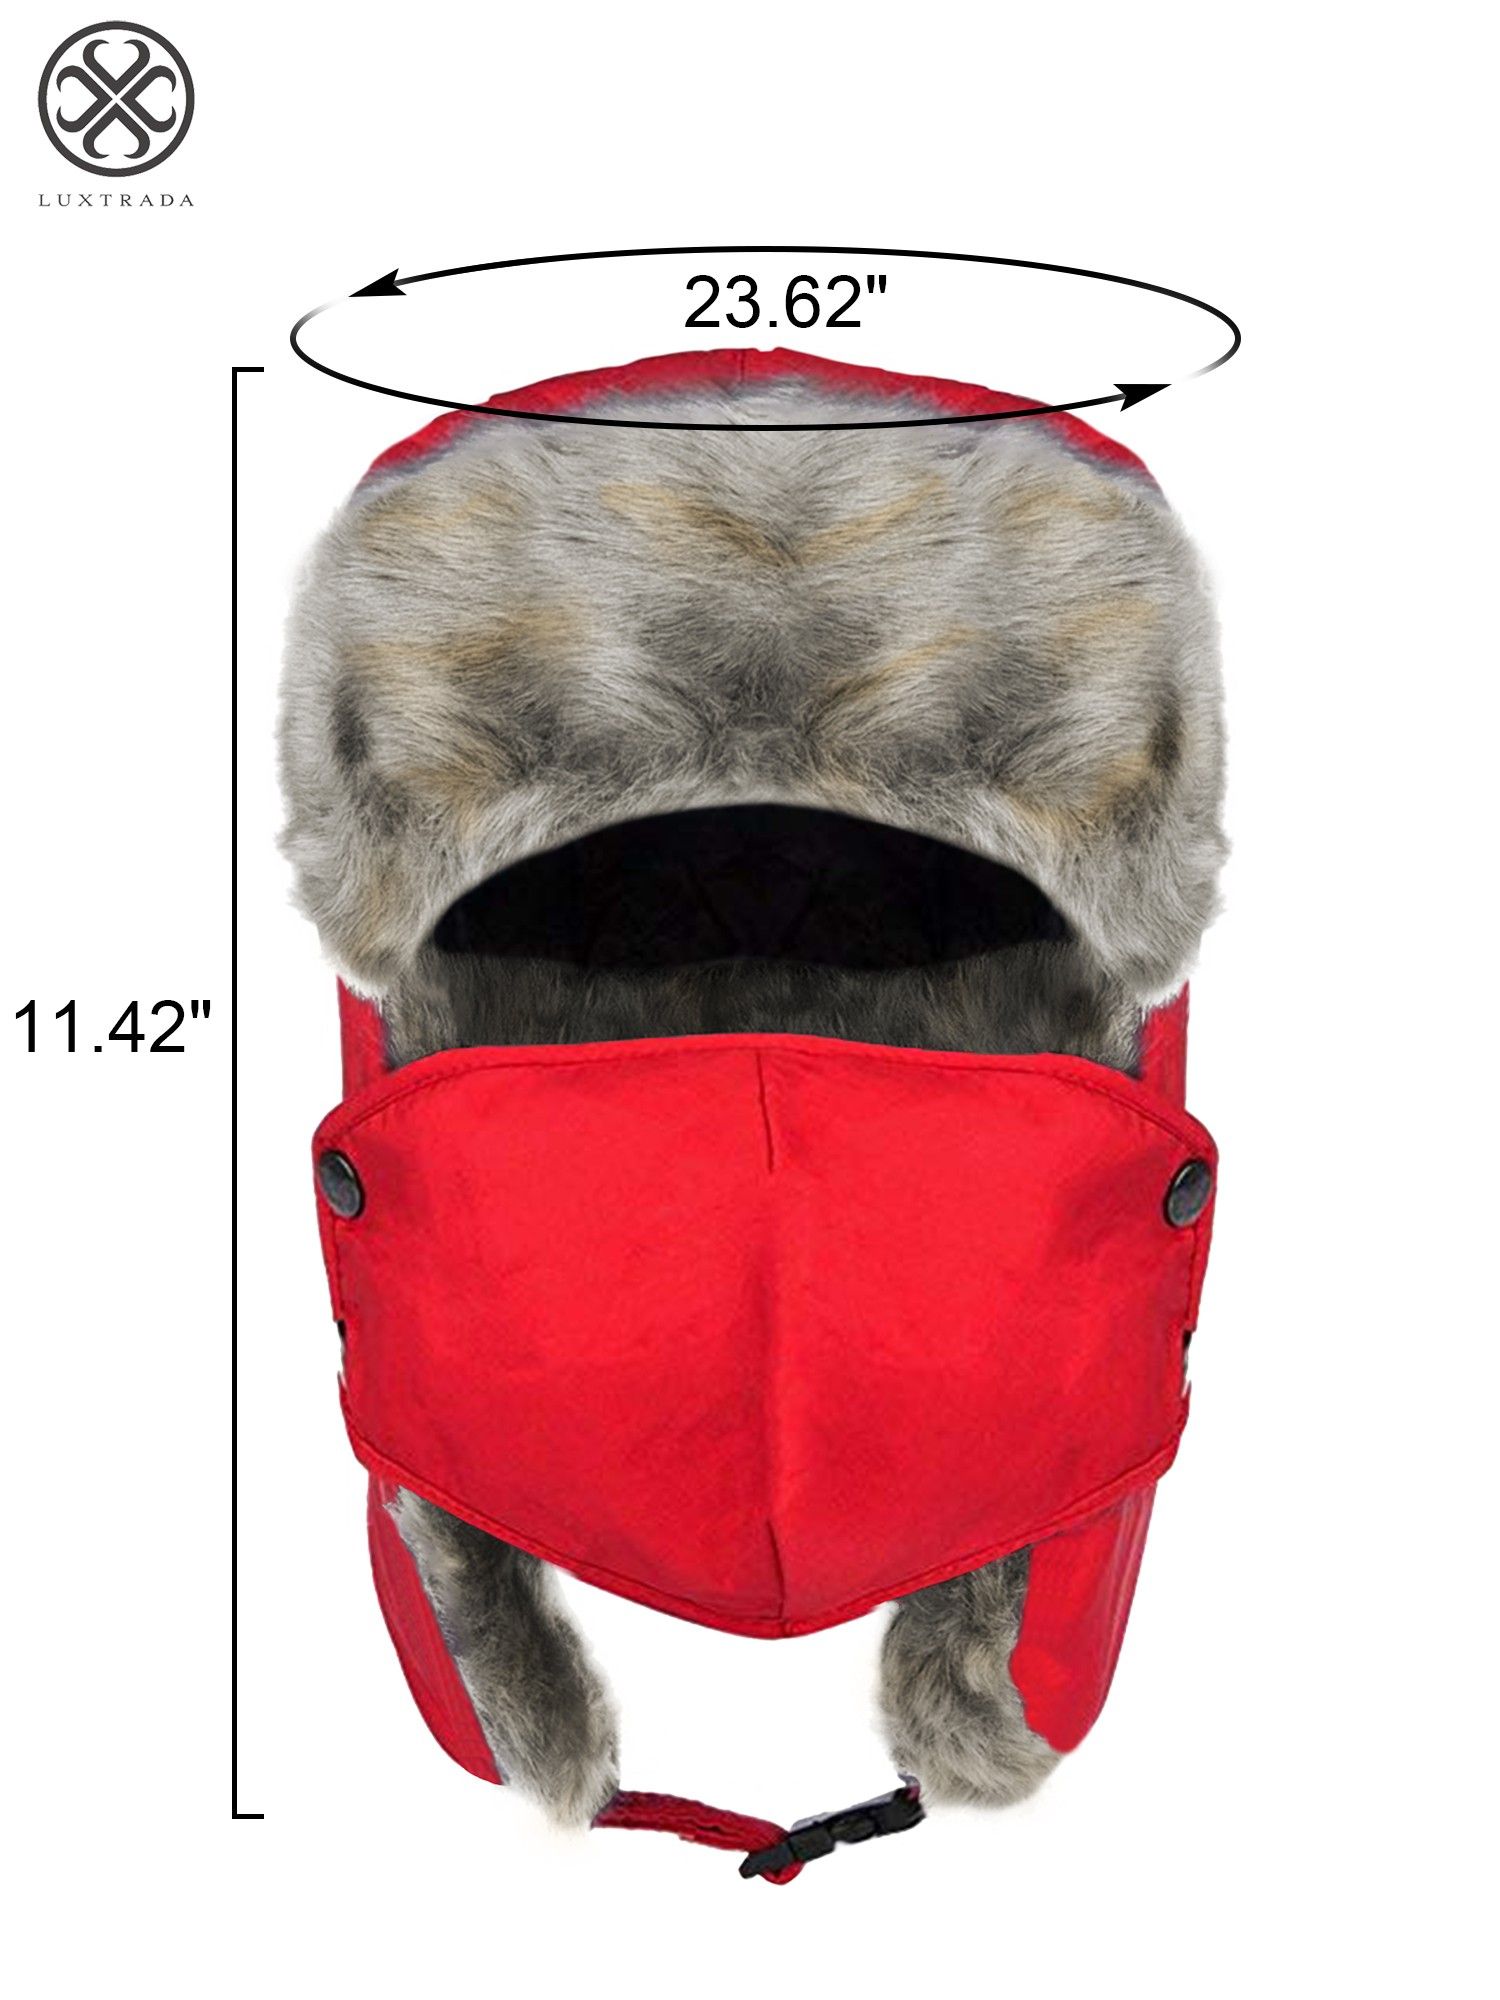 Luxtrada Winter Hats for Men and Women Trooper Hunting Hat Ushanka Hat Ski Hat with Ear Flaps Windproof Waterproof Warm Hat (Red) - image 3 of 10